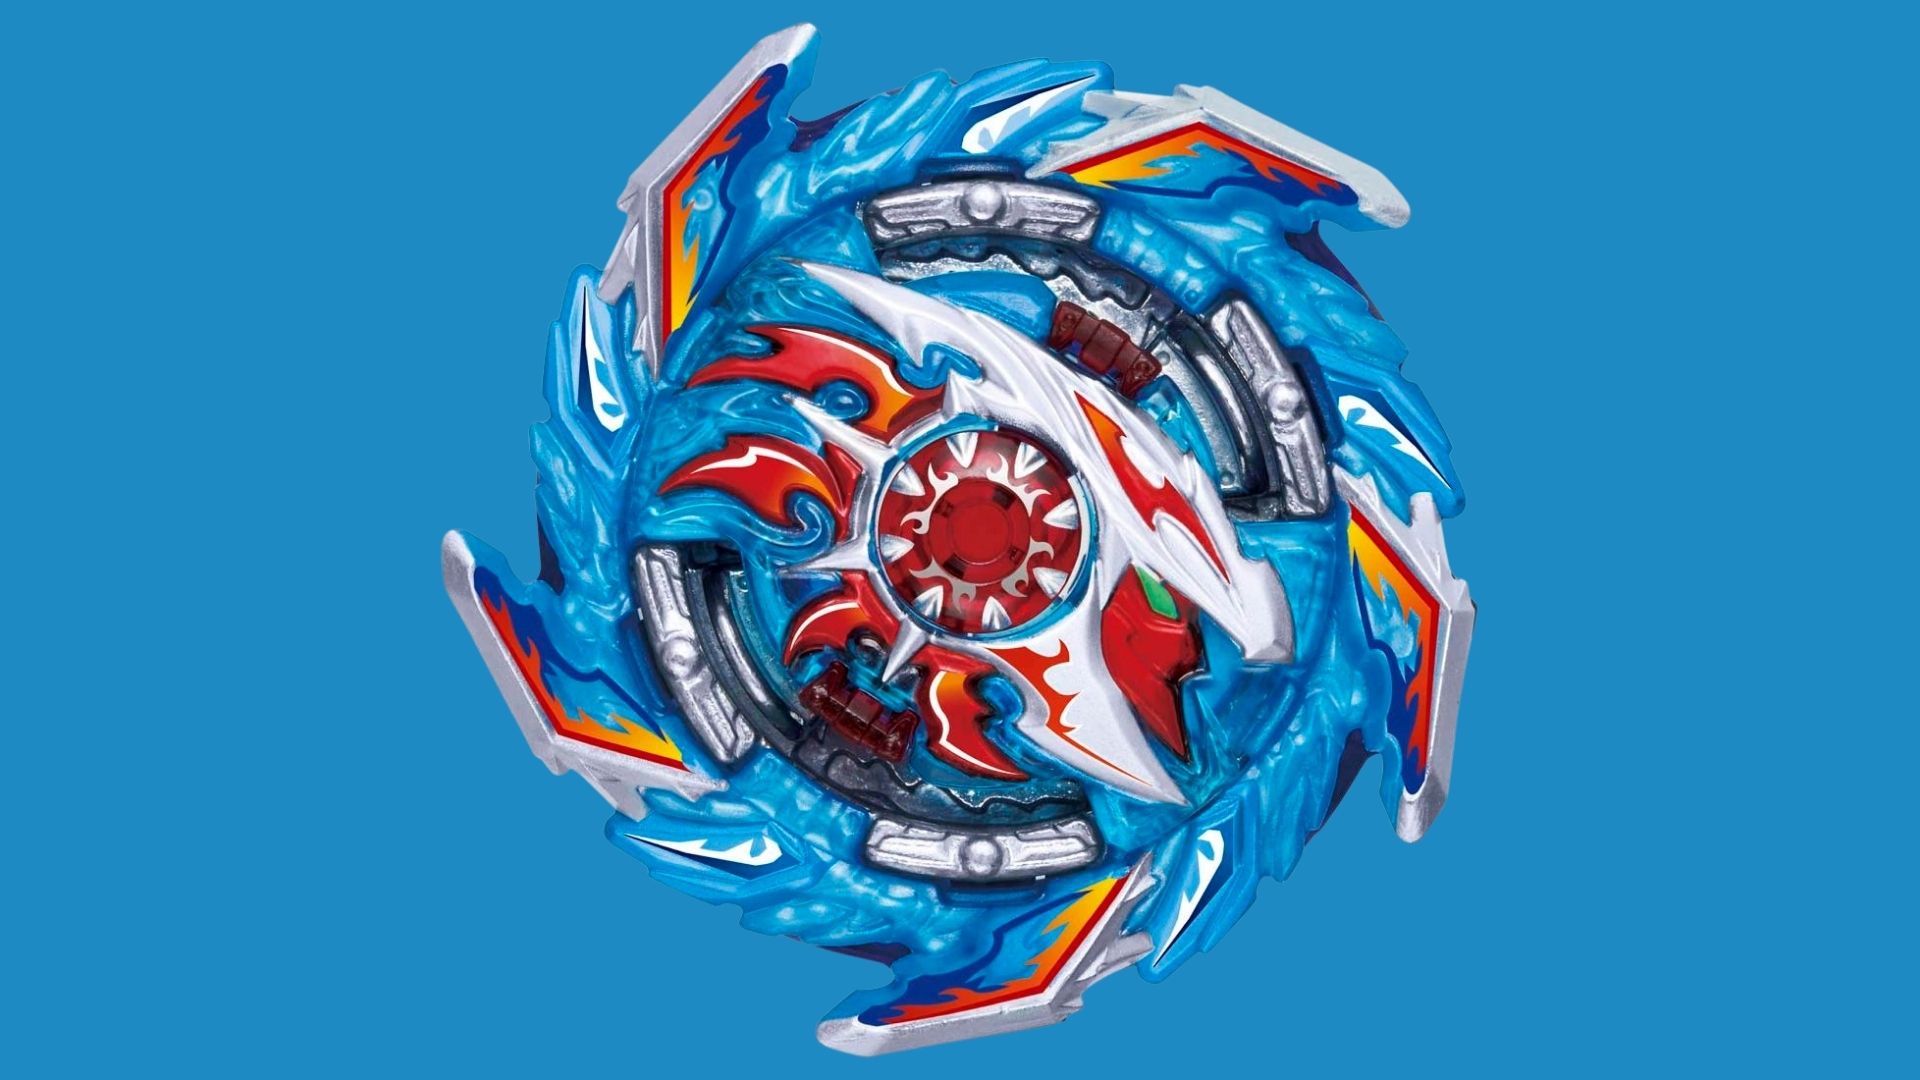 Top 10 Strongest Beyblades